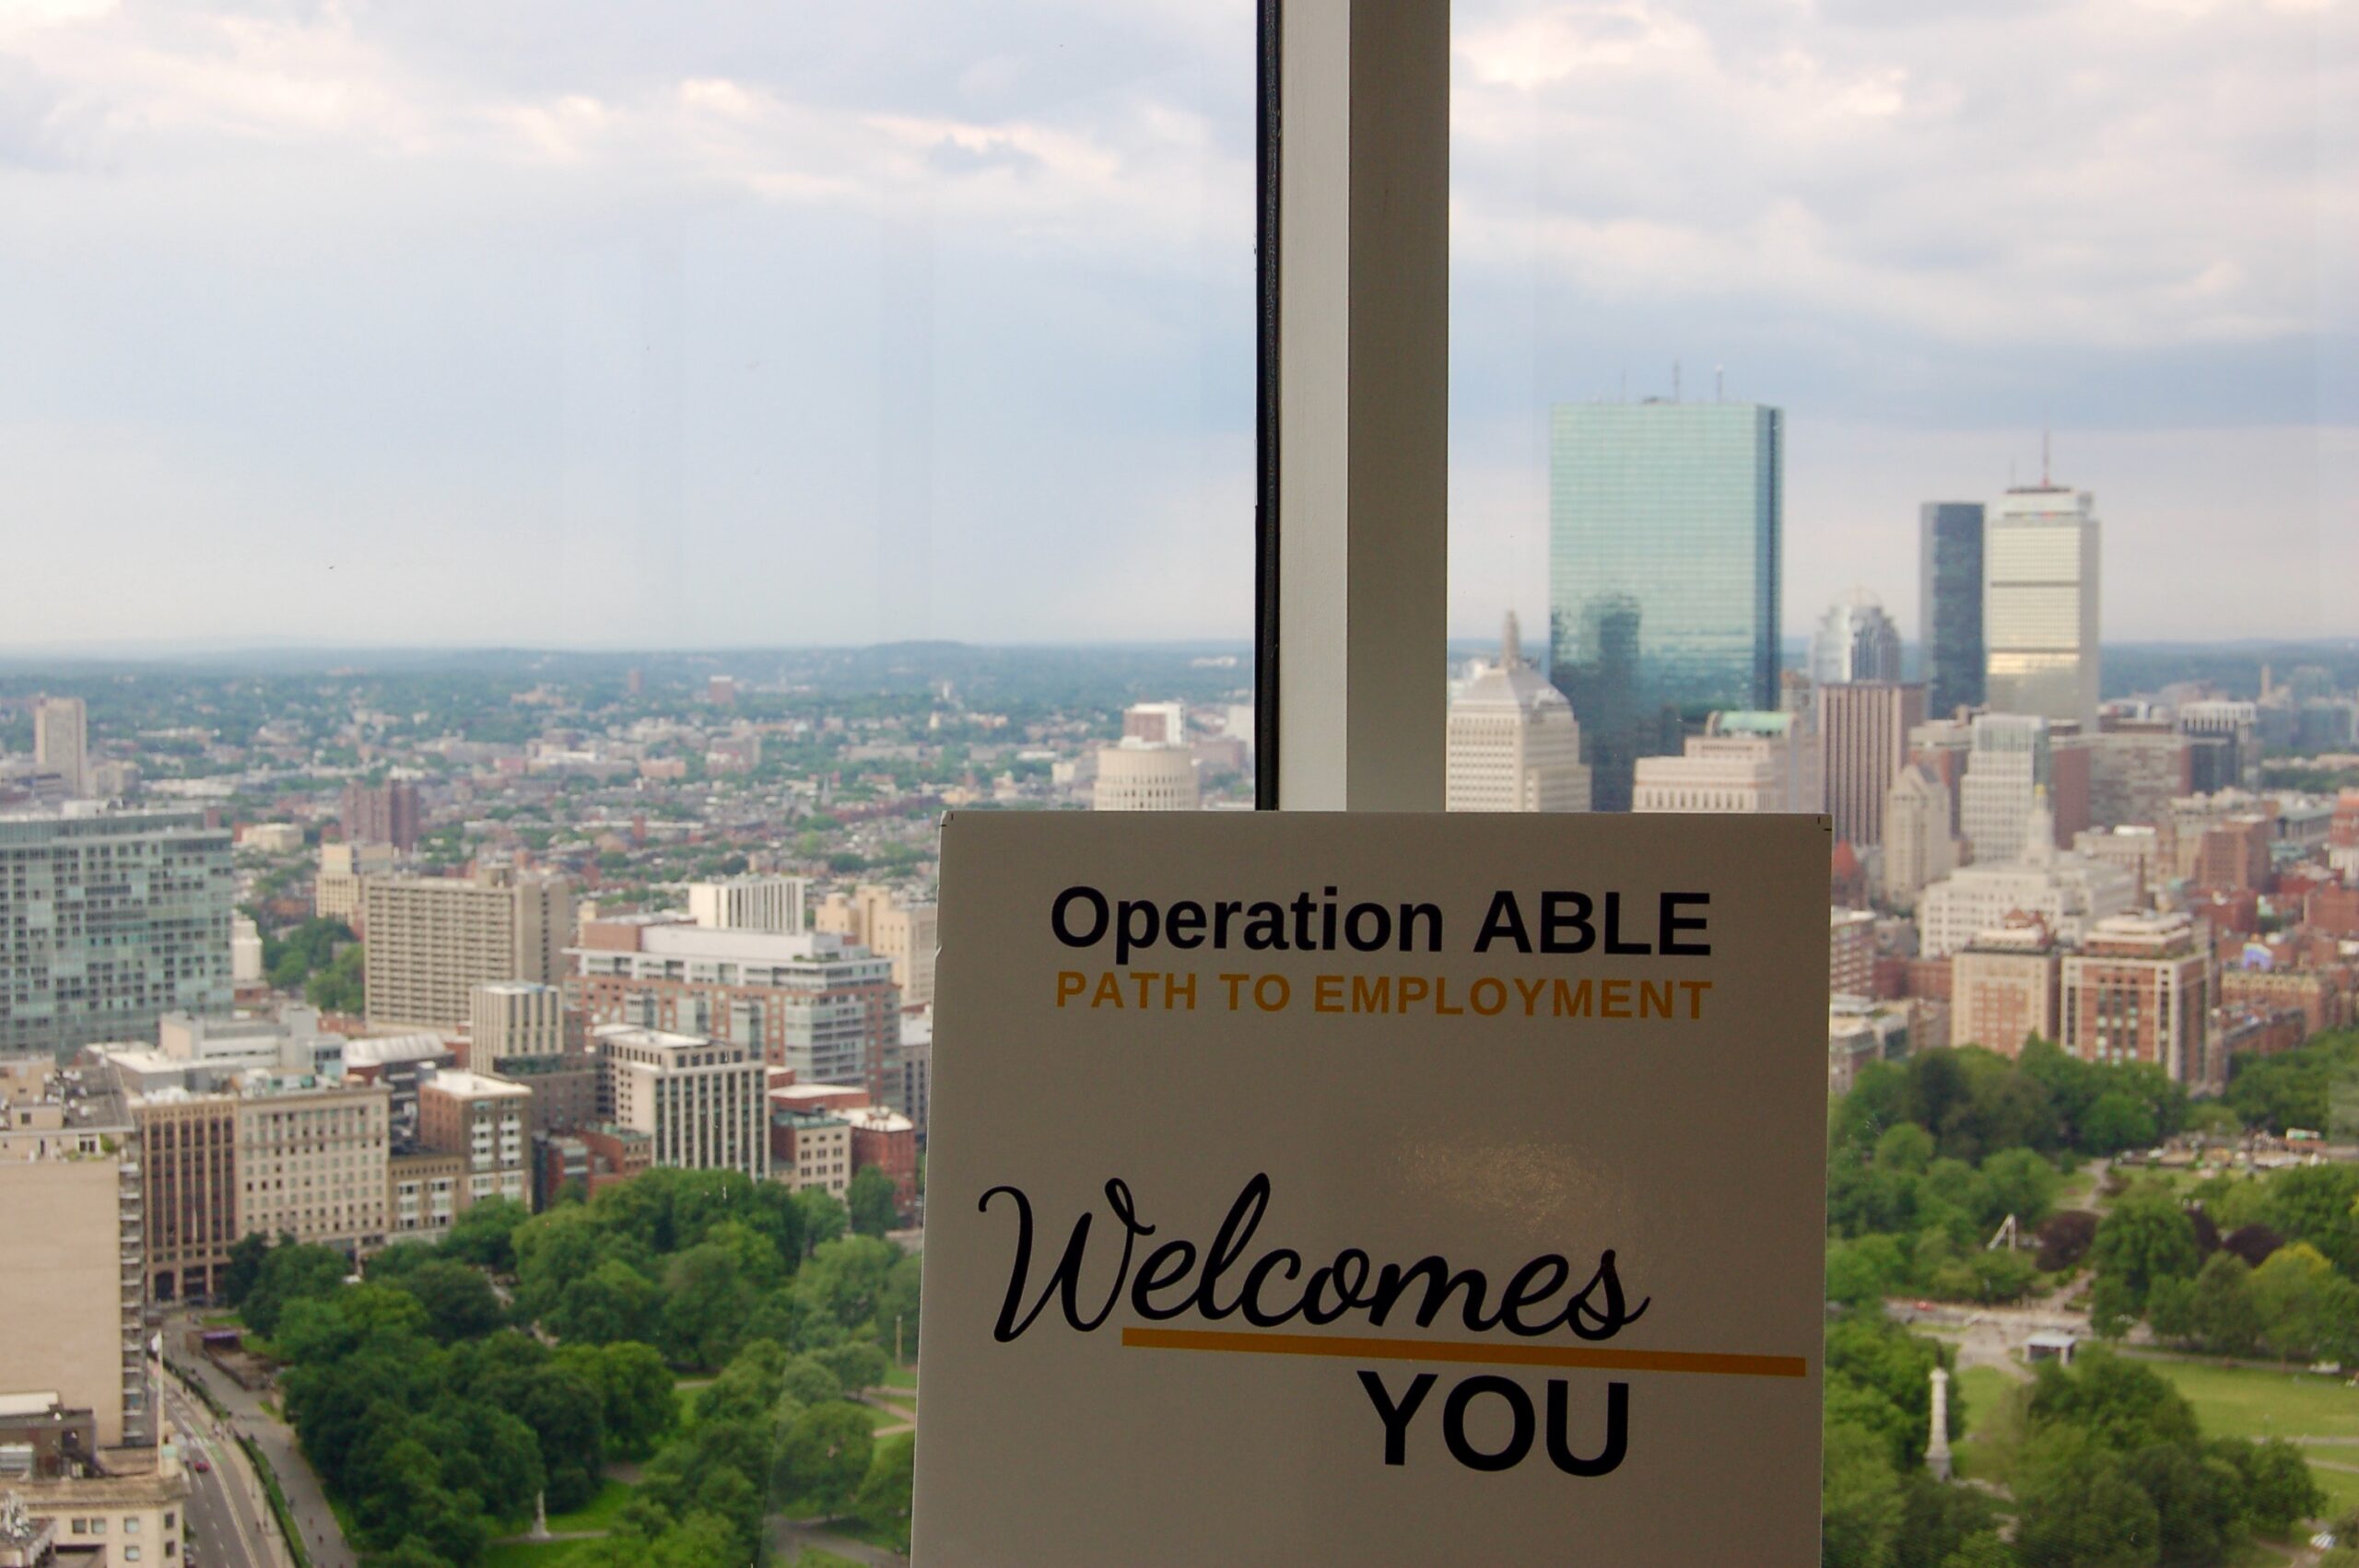 window view with the Operation ABLE Welcome sign